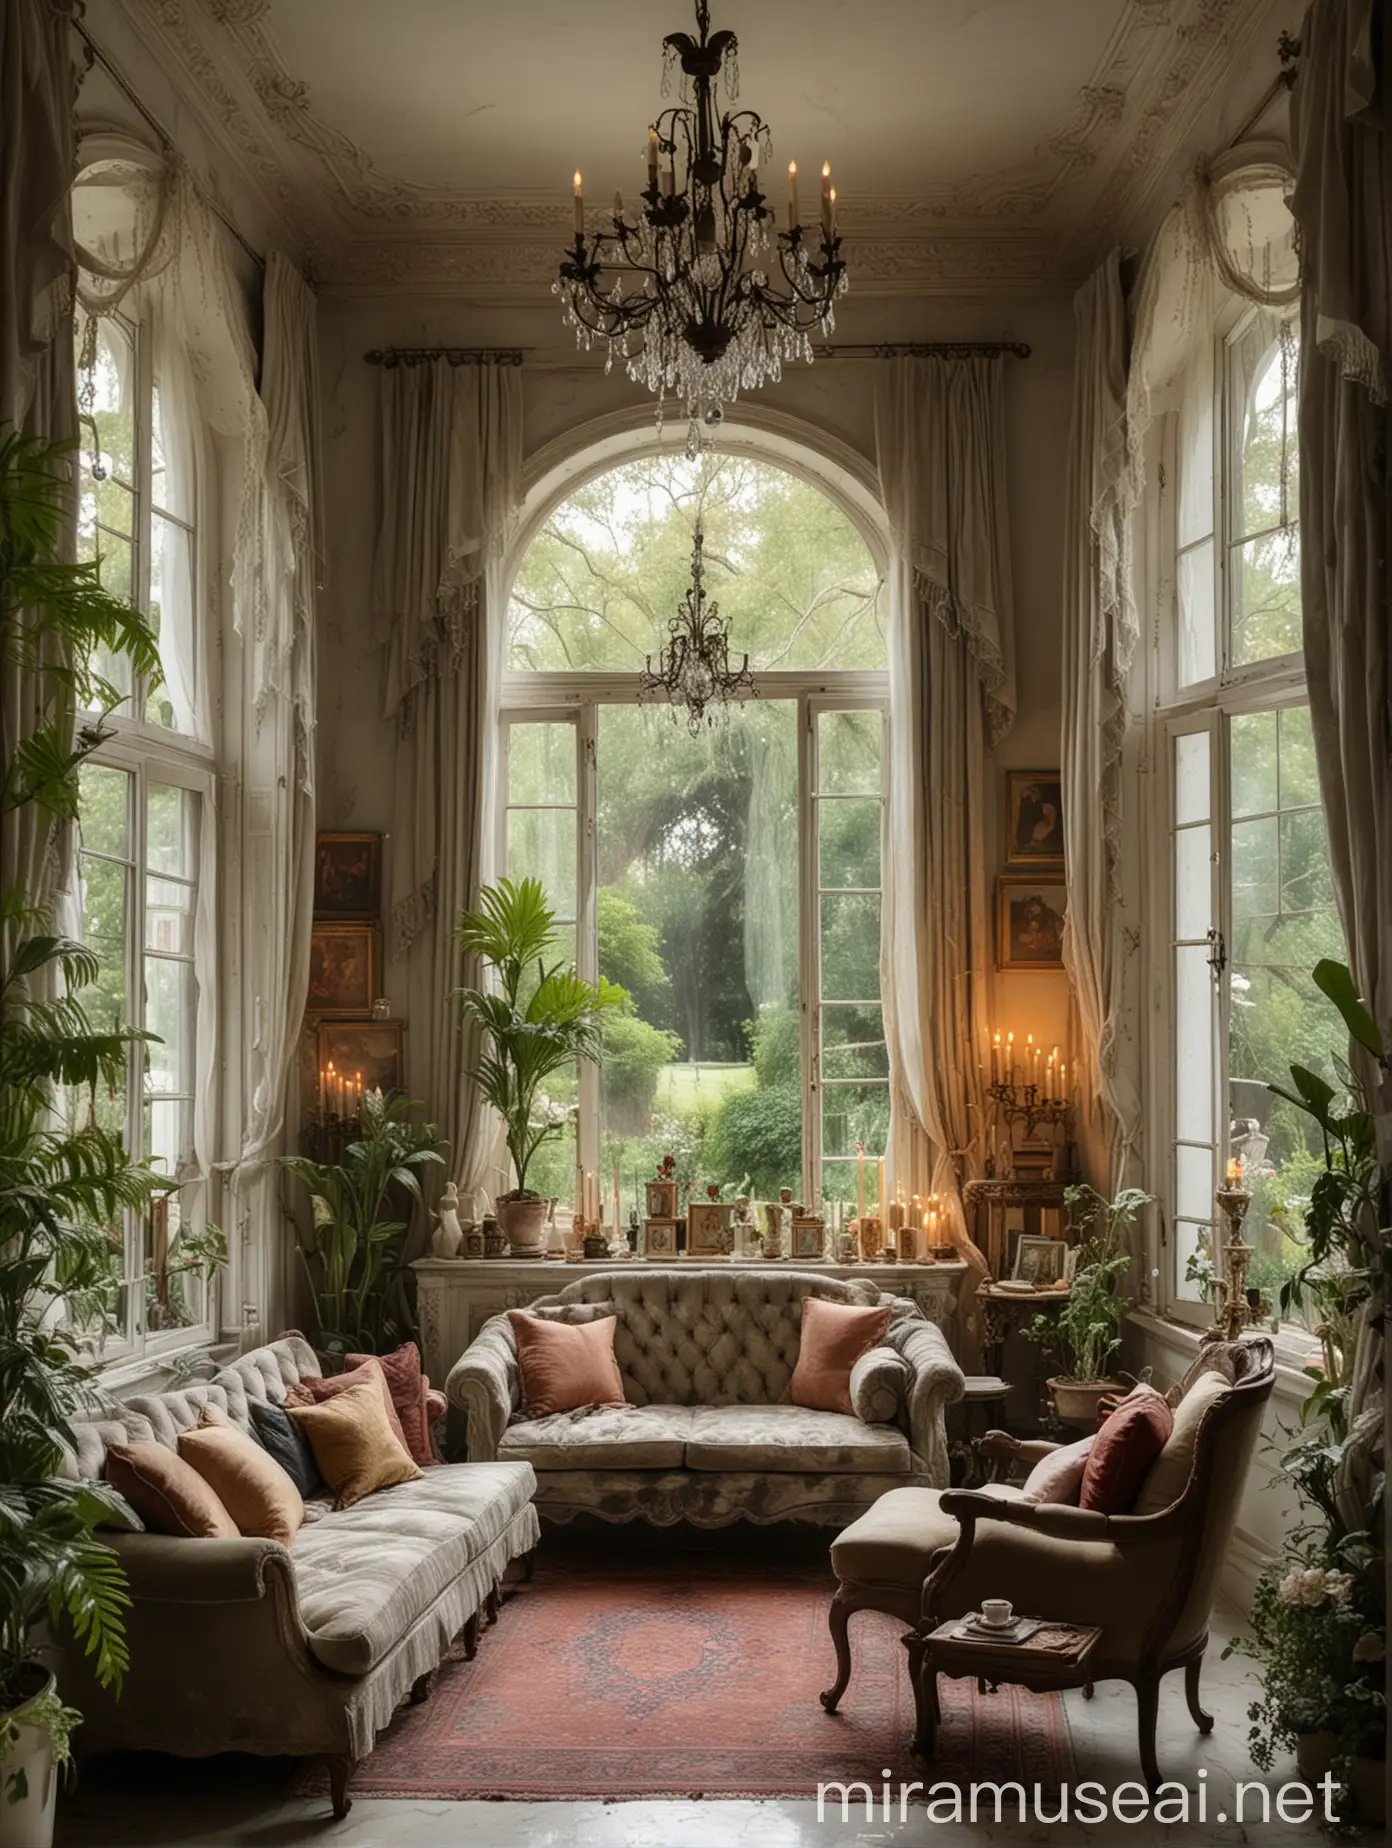 interior beautiful garden, candles, paintings on the walls, marble sculptures, big windows with flying curtains, chandelier, books, dandy oscar wild inspiration